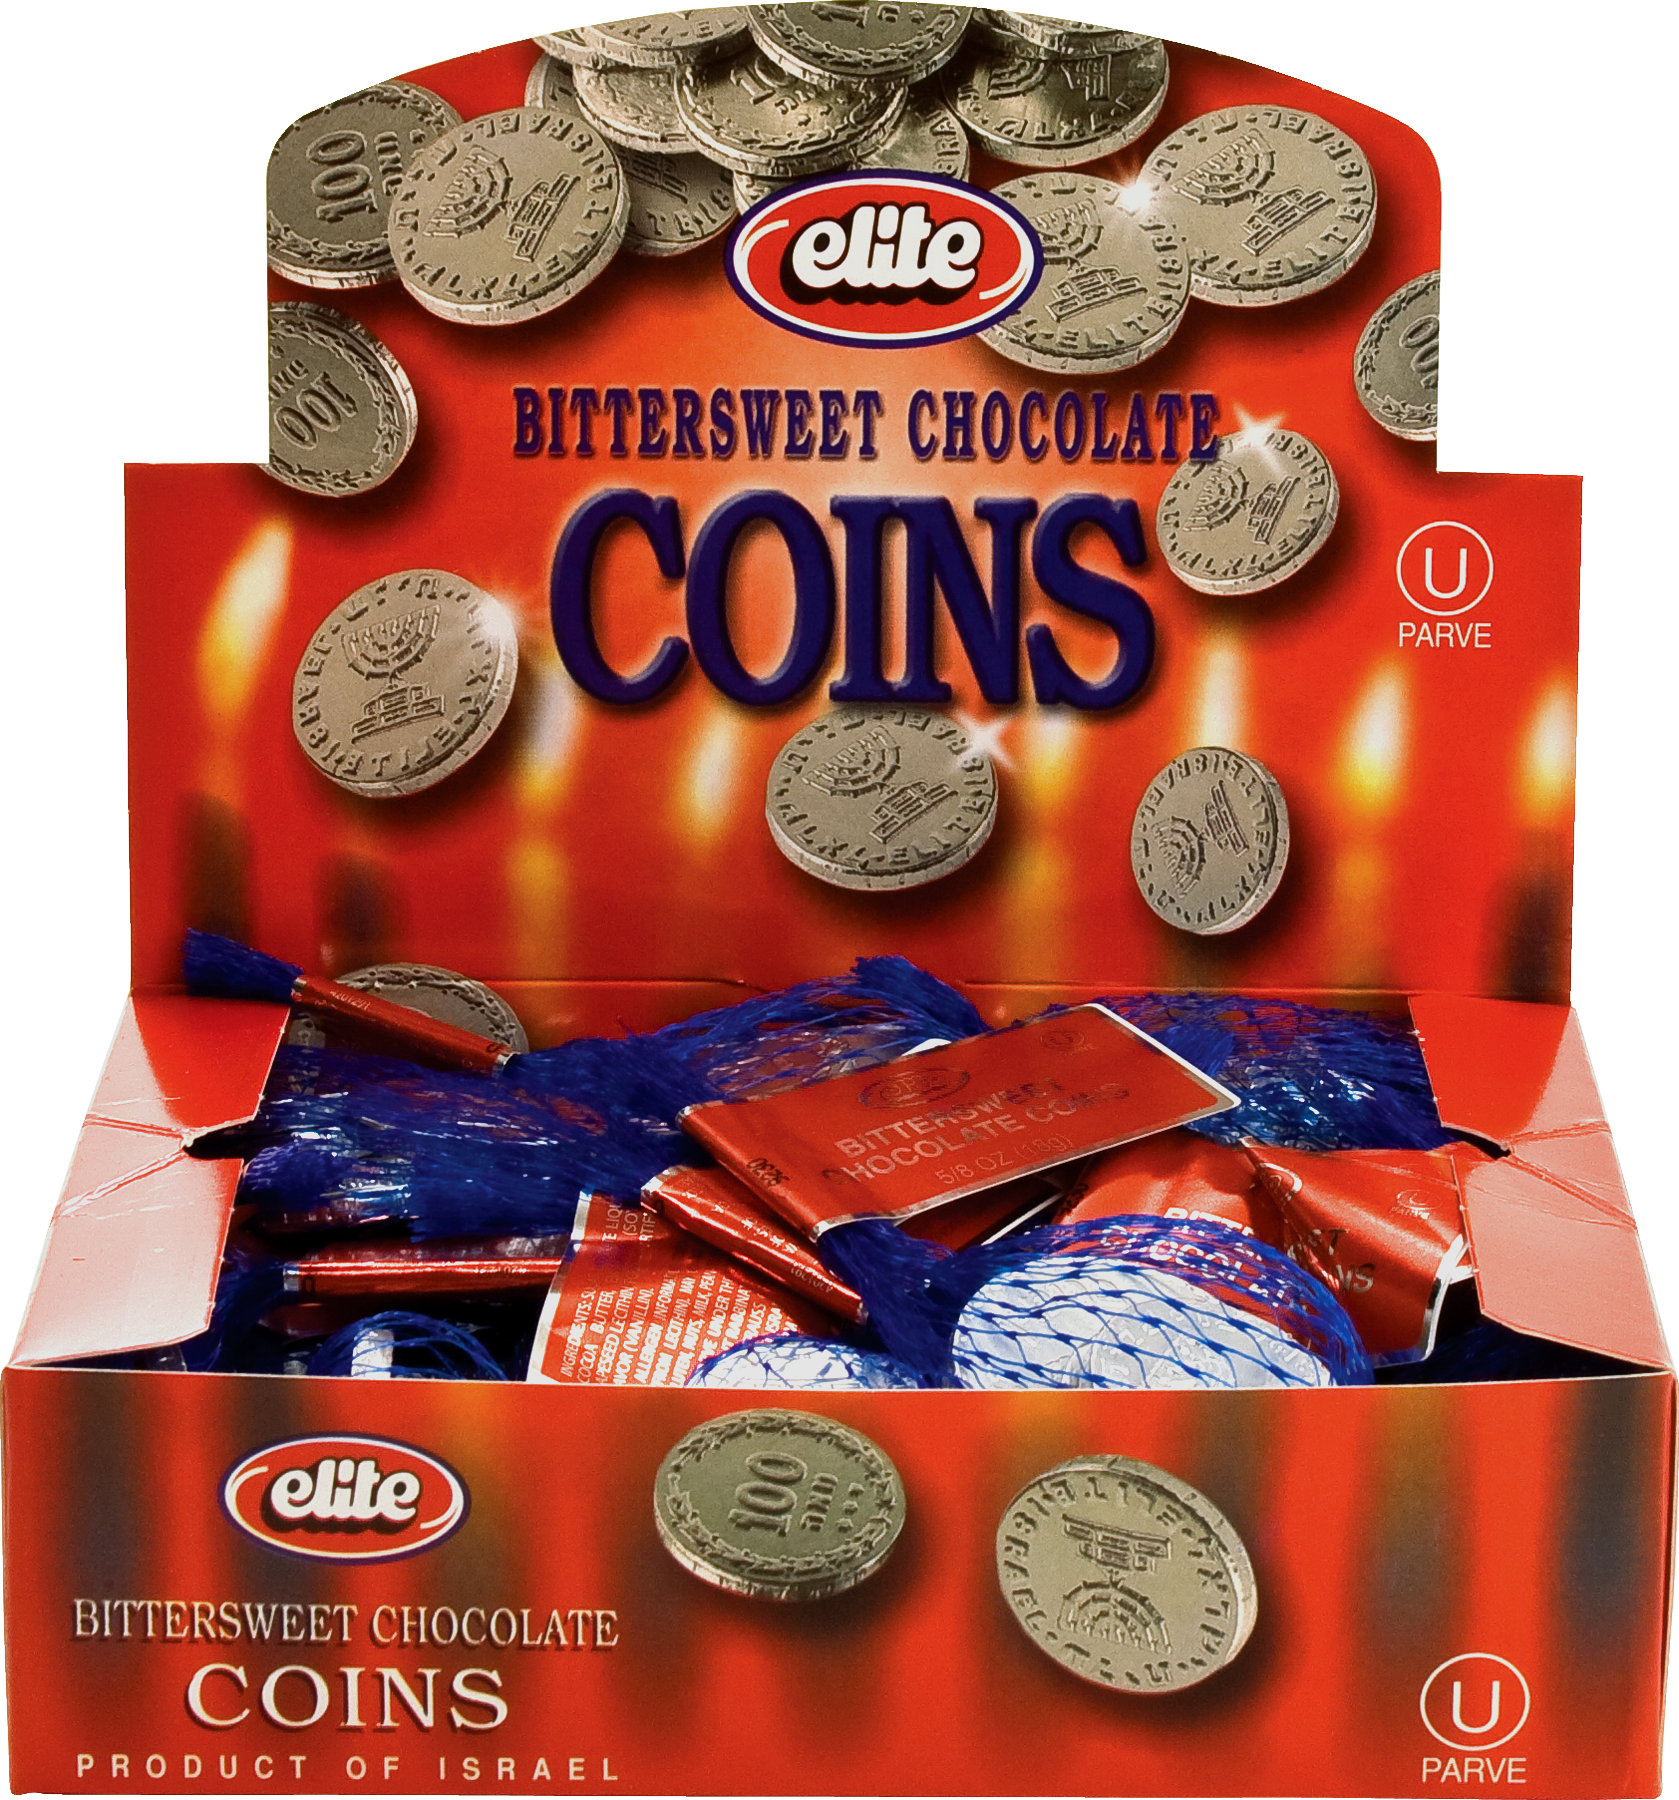 (24 Pack) Elite Bittersweet Chocolate coin - image 1 of 3